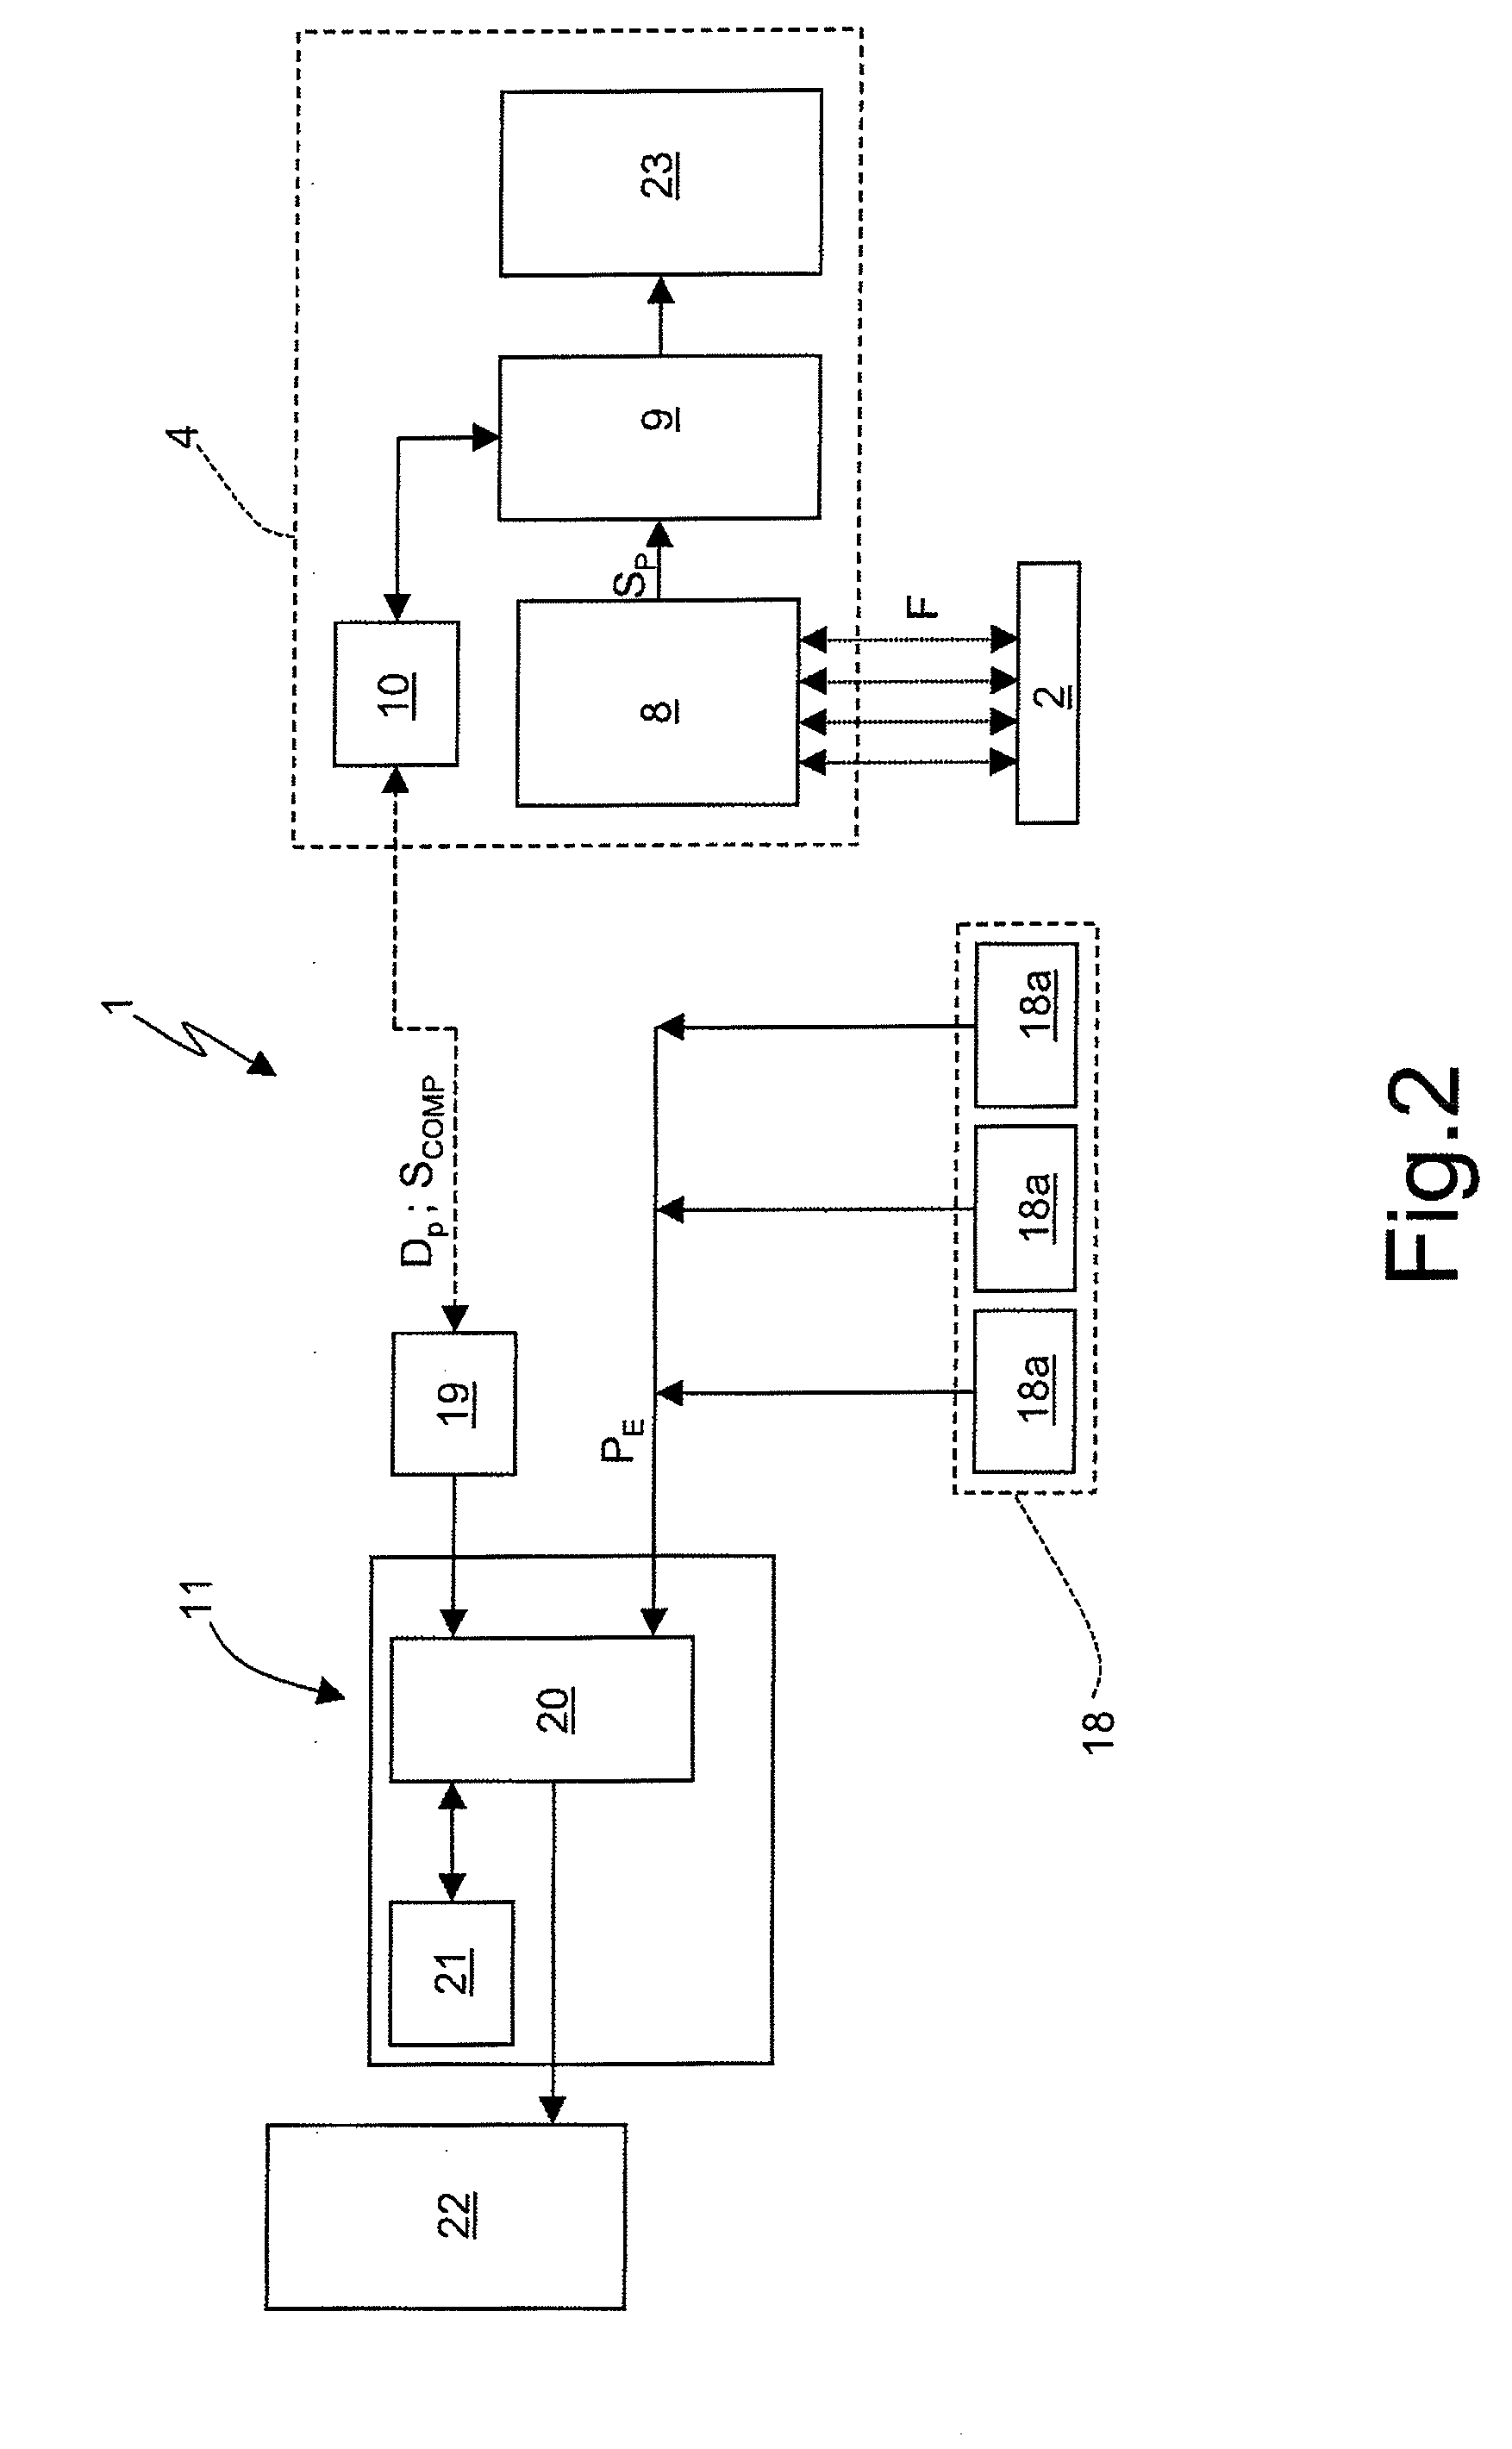 System for controlling the loading of one or more foods into a self-propelled mixing unit by means of a mechanical shovel mounted to a motor vehicle